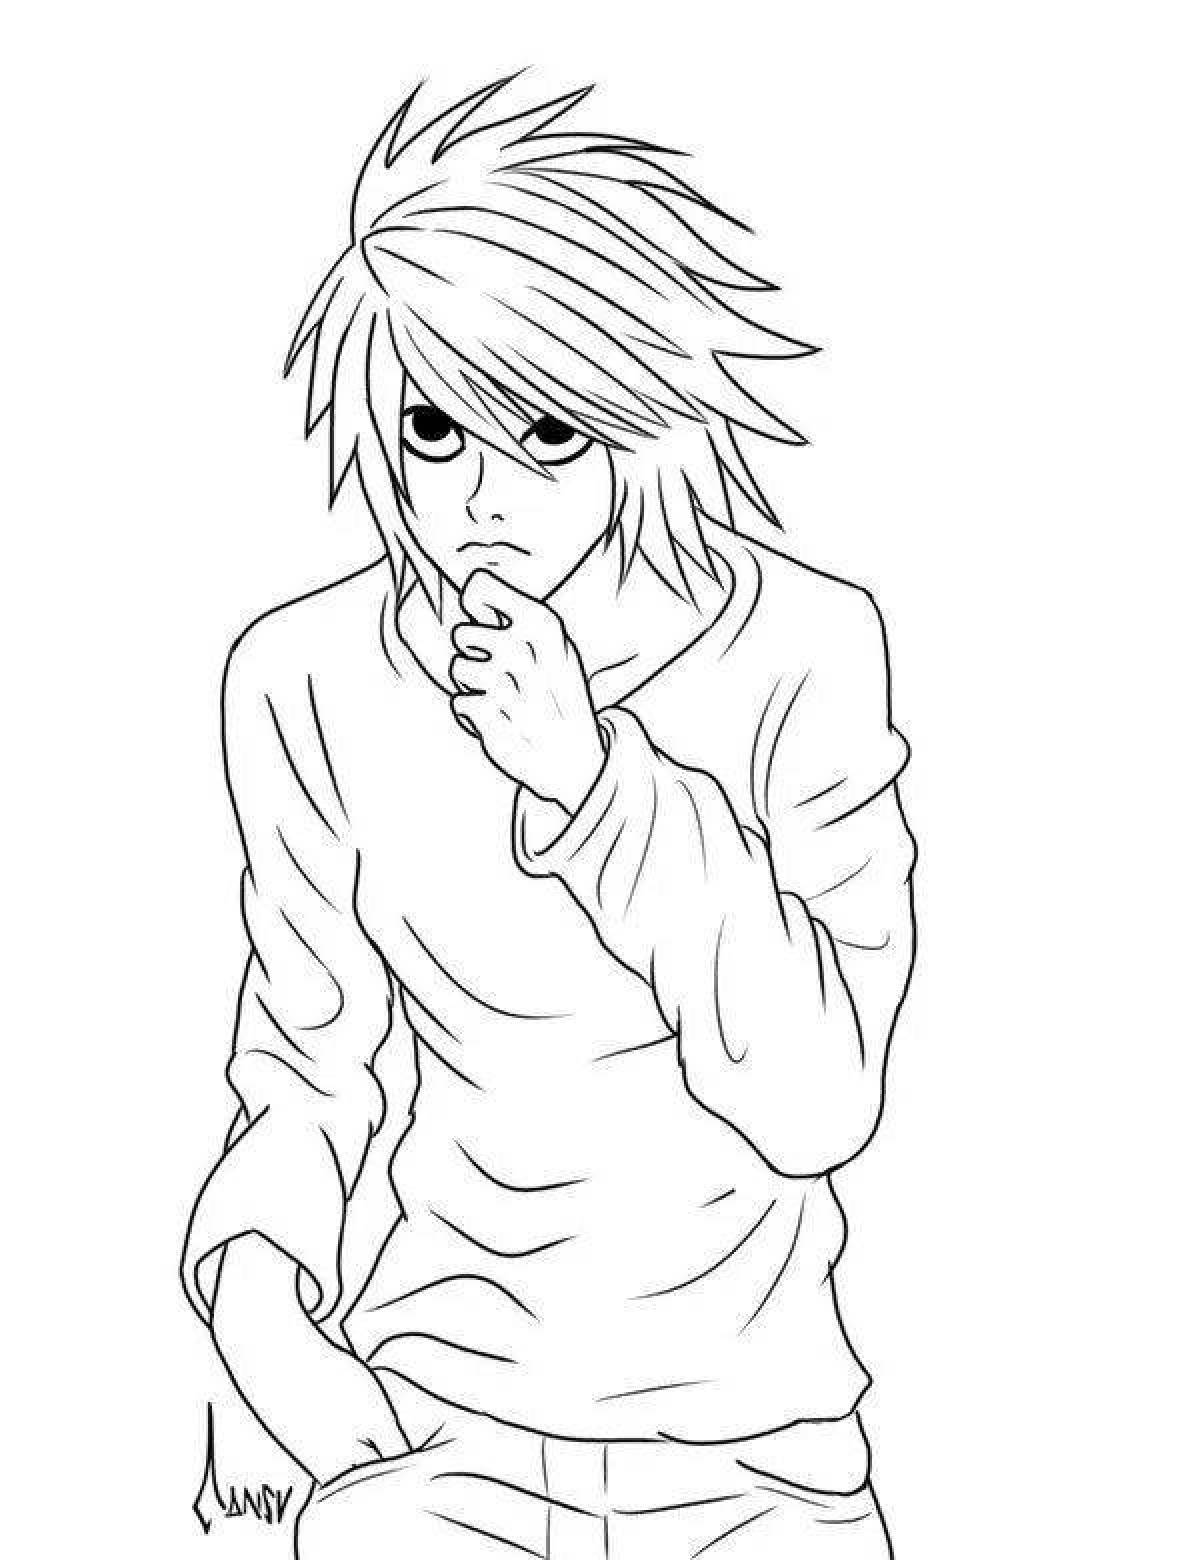 Radiant death note anime coloring page